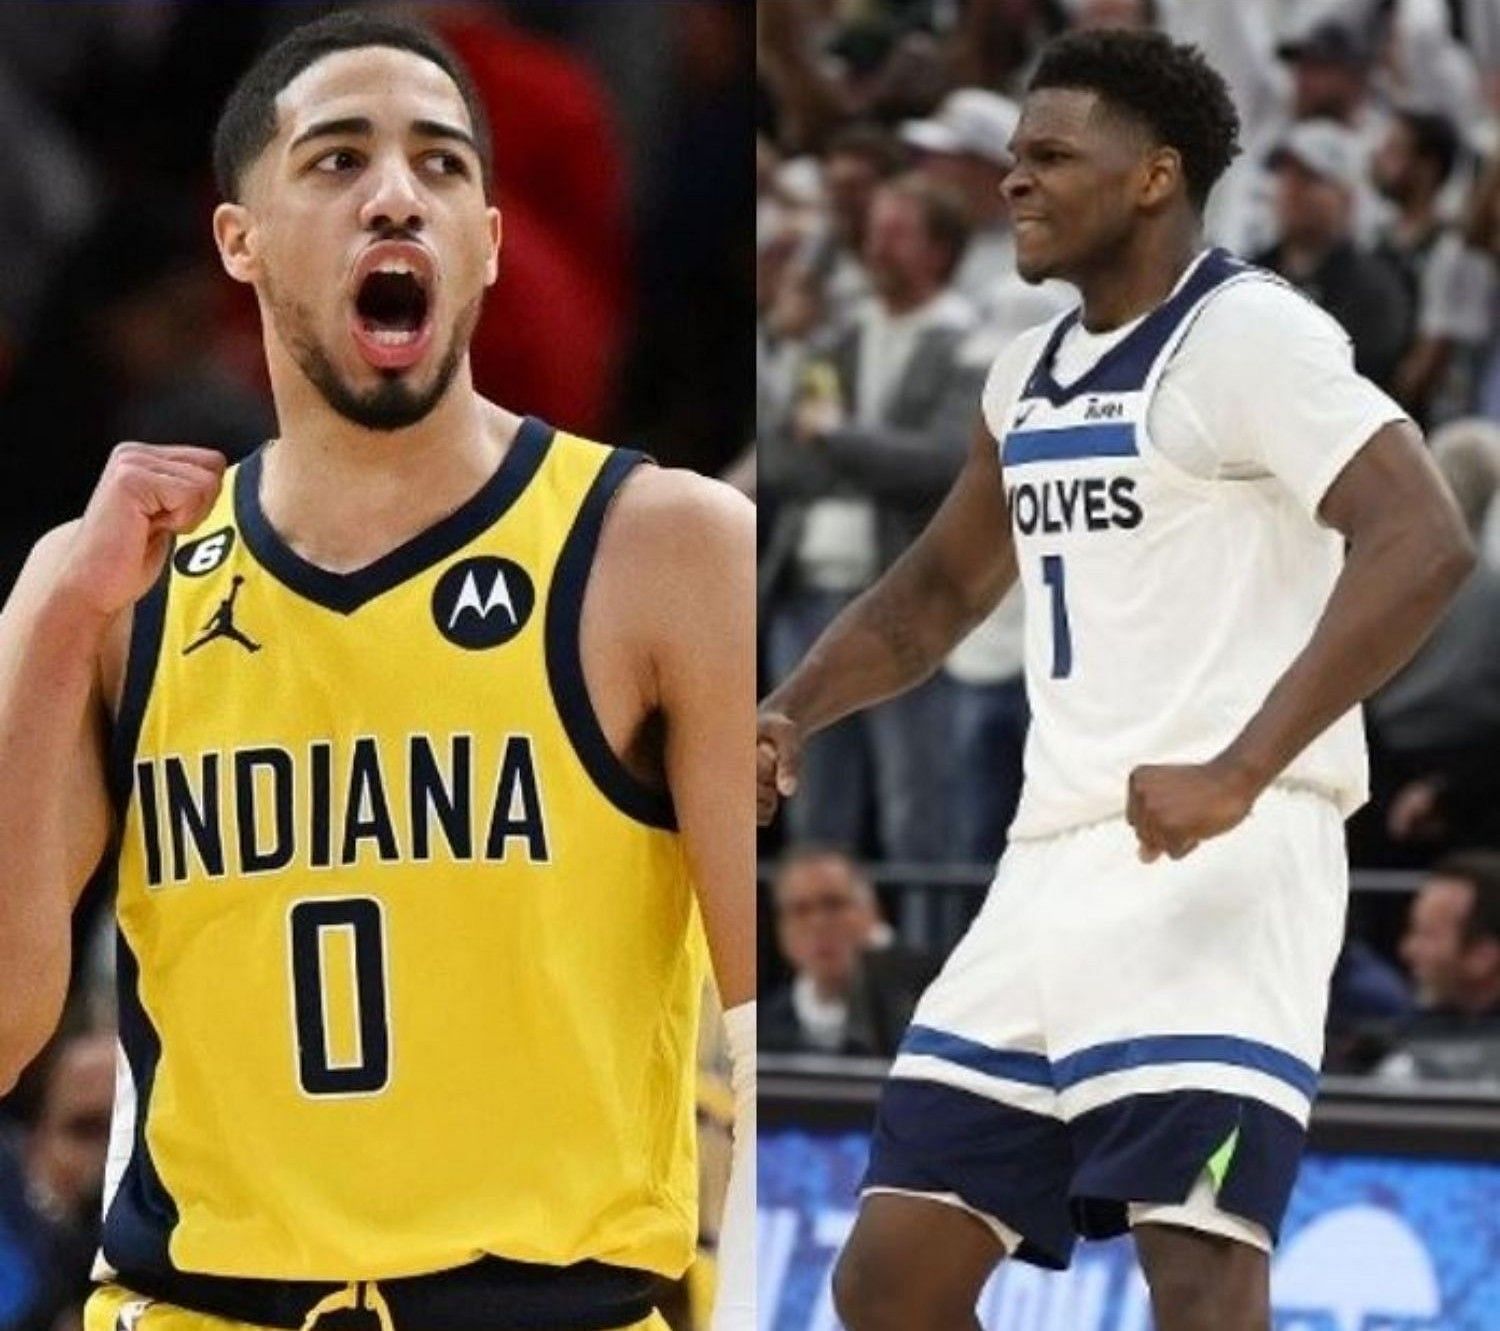 Minnesota Timberwolves vs Indiana Pacers: Game details, preview, betting tips, prediction and more